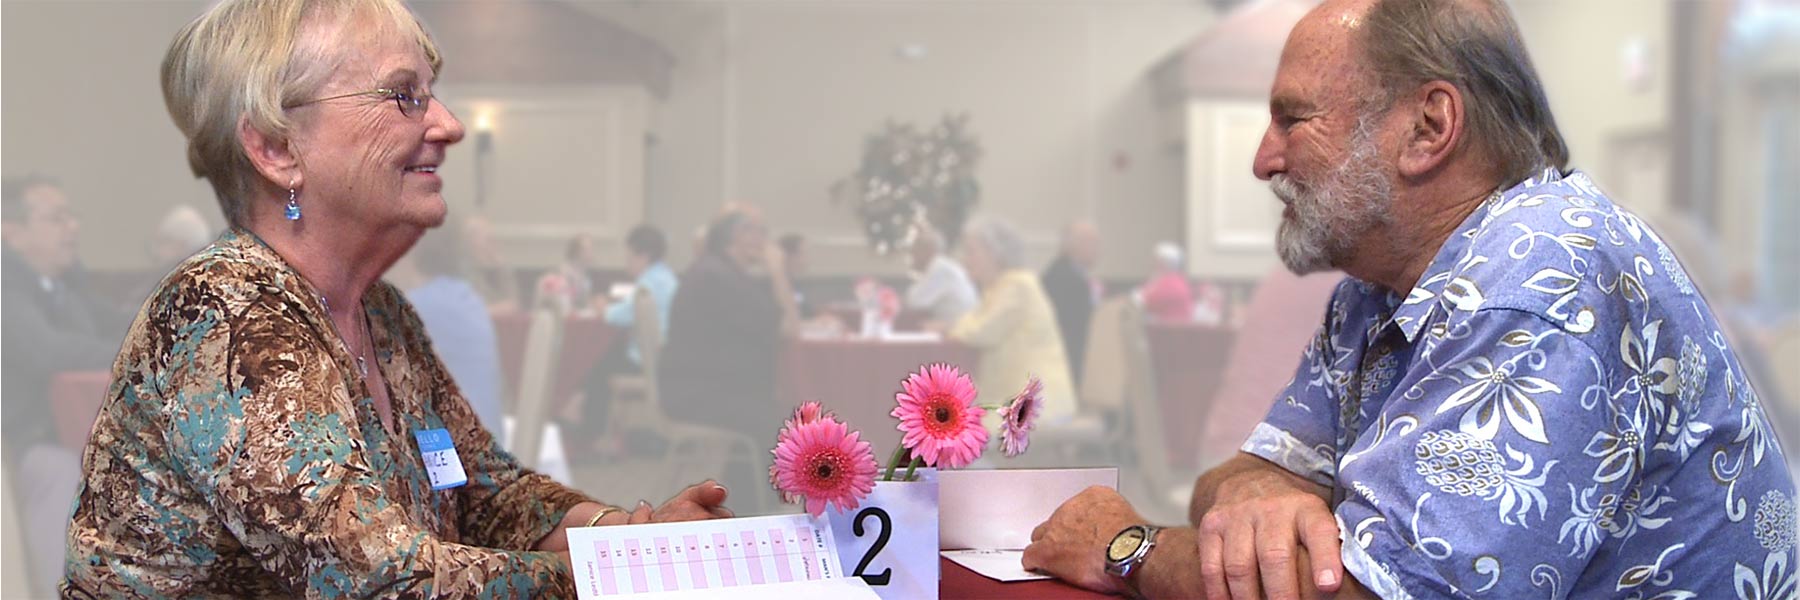 Janice and Pacho at a senior speed dating event